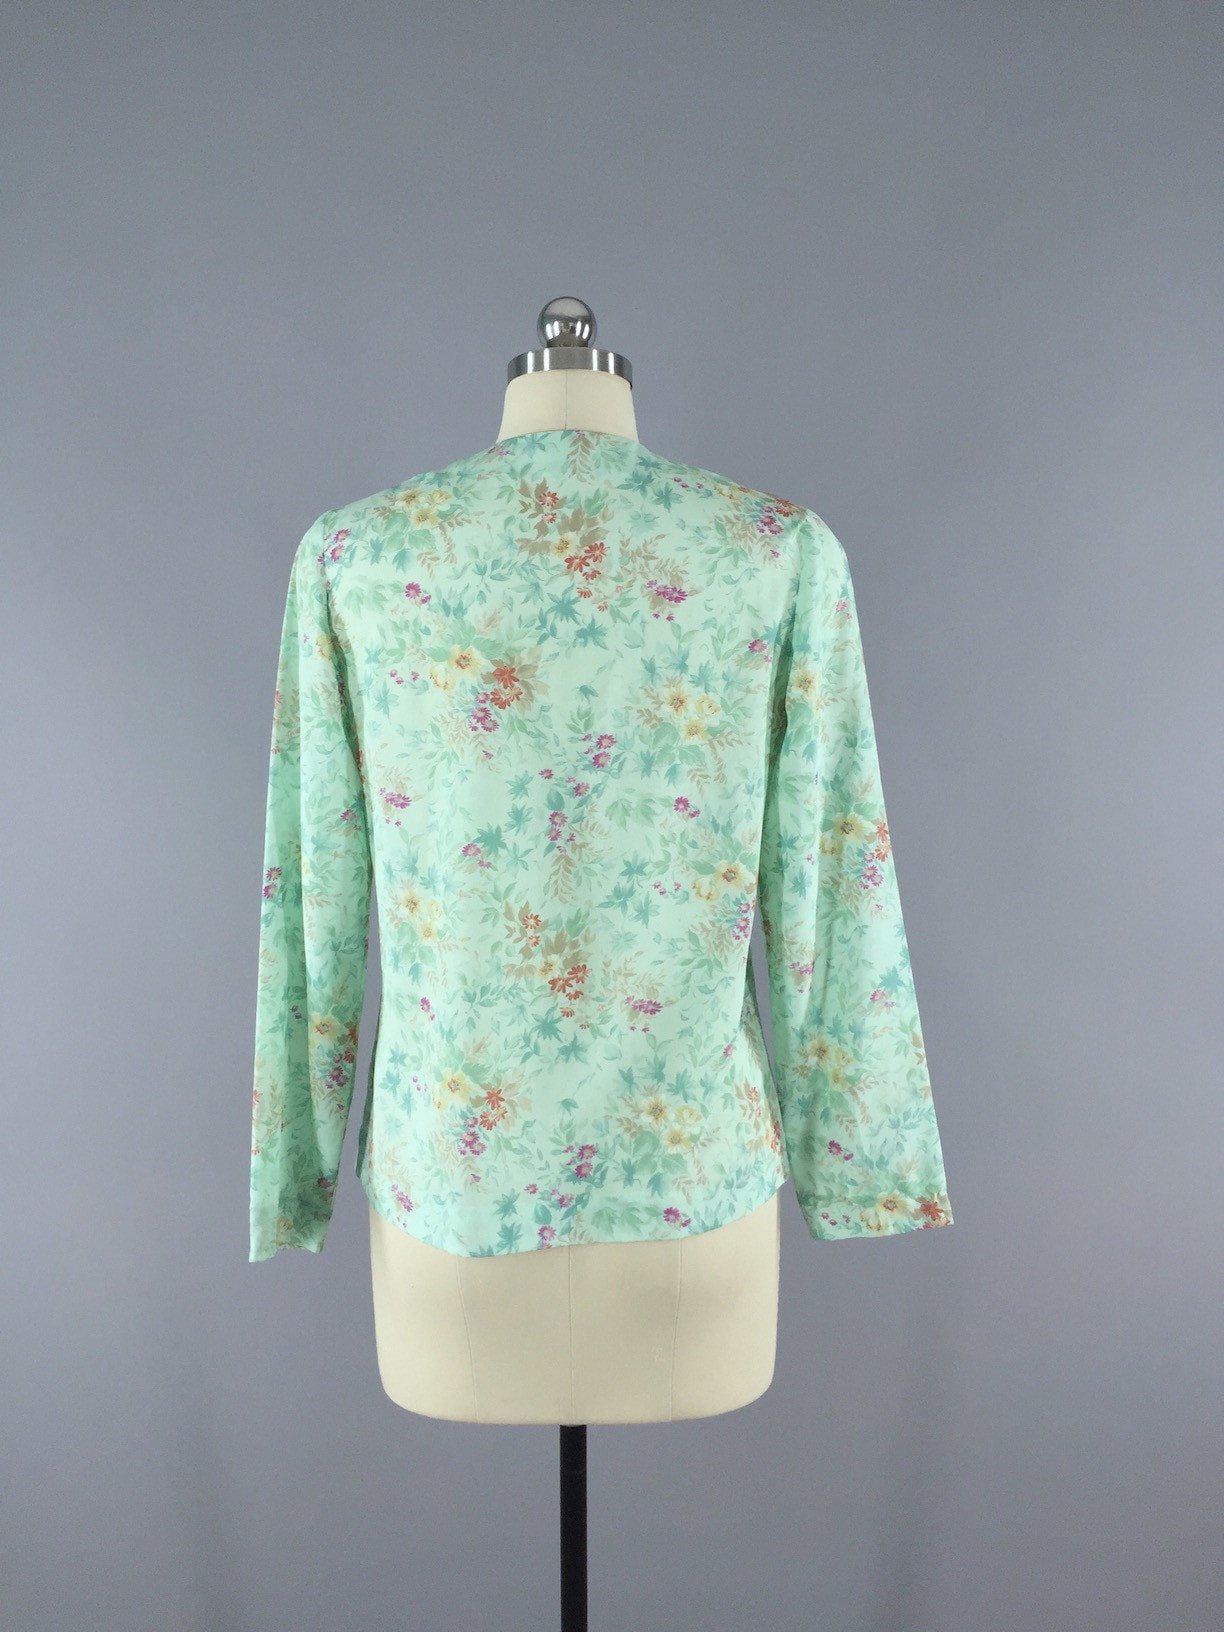 Vintage Mint Green Floral Blouse - ThisBlueBird